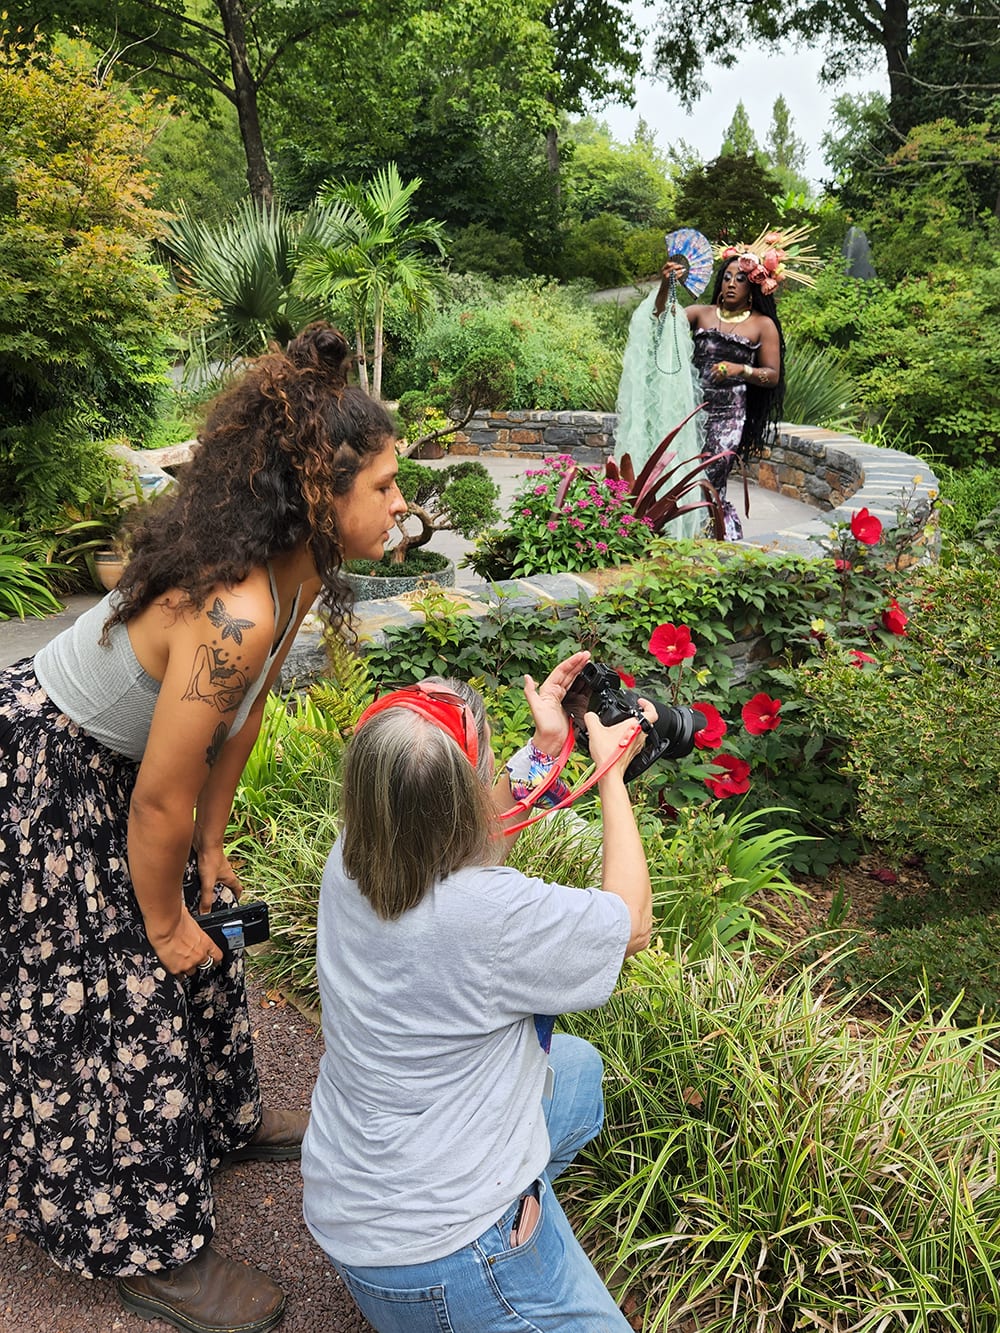 Two women confer while one photographs a person in a long purple dress and holding a fan and a pale green scarf, all standing in a verdant garden with red flowers and lots of varied greenery.